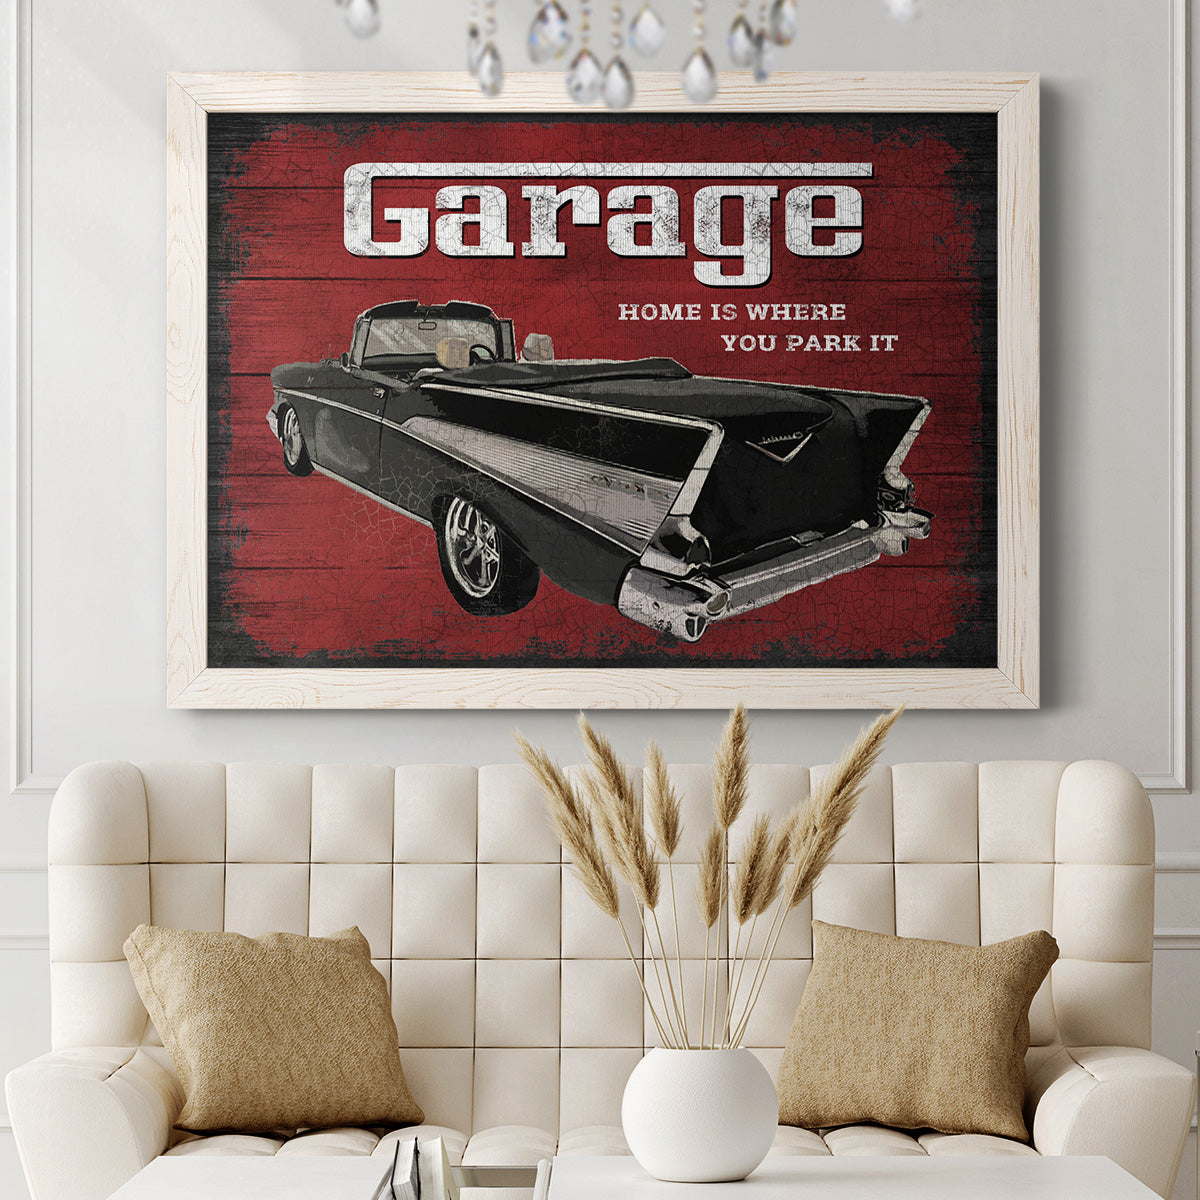 The Garage-Premium Framed Canvas - Ready to Hang